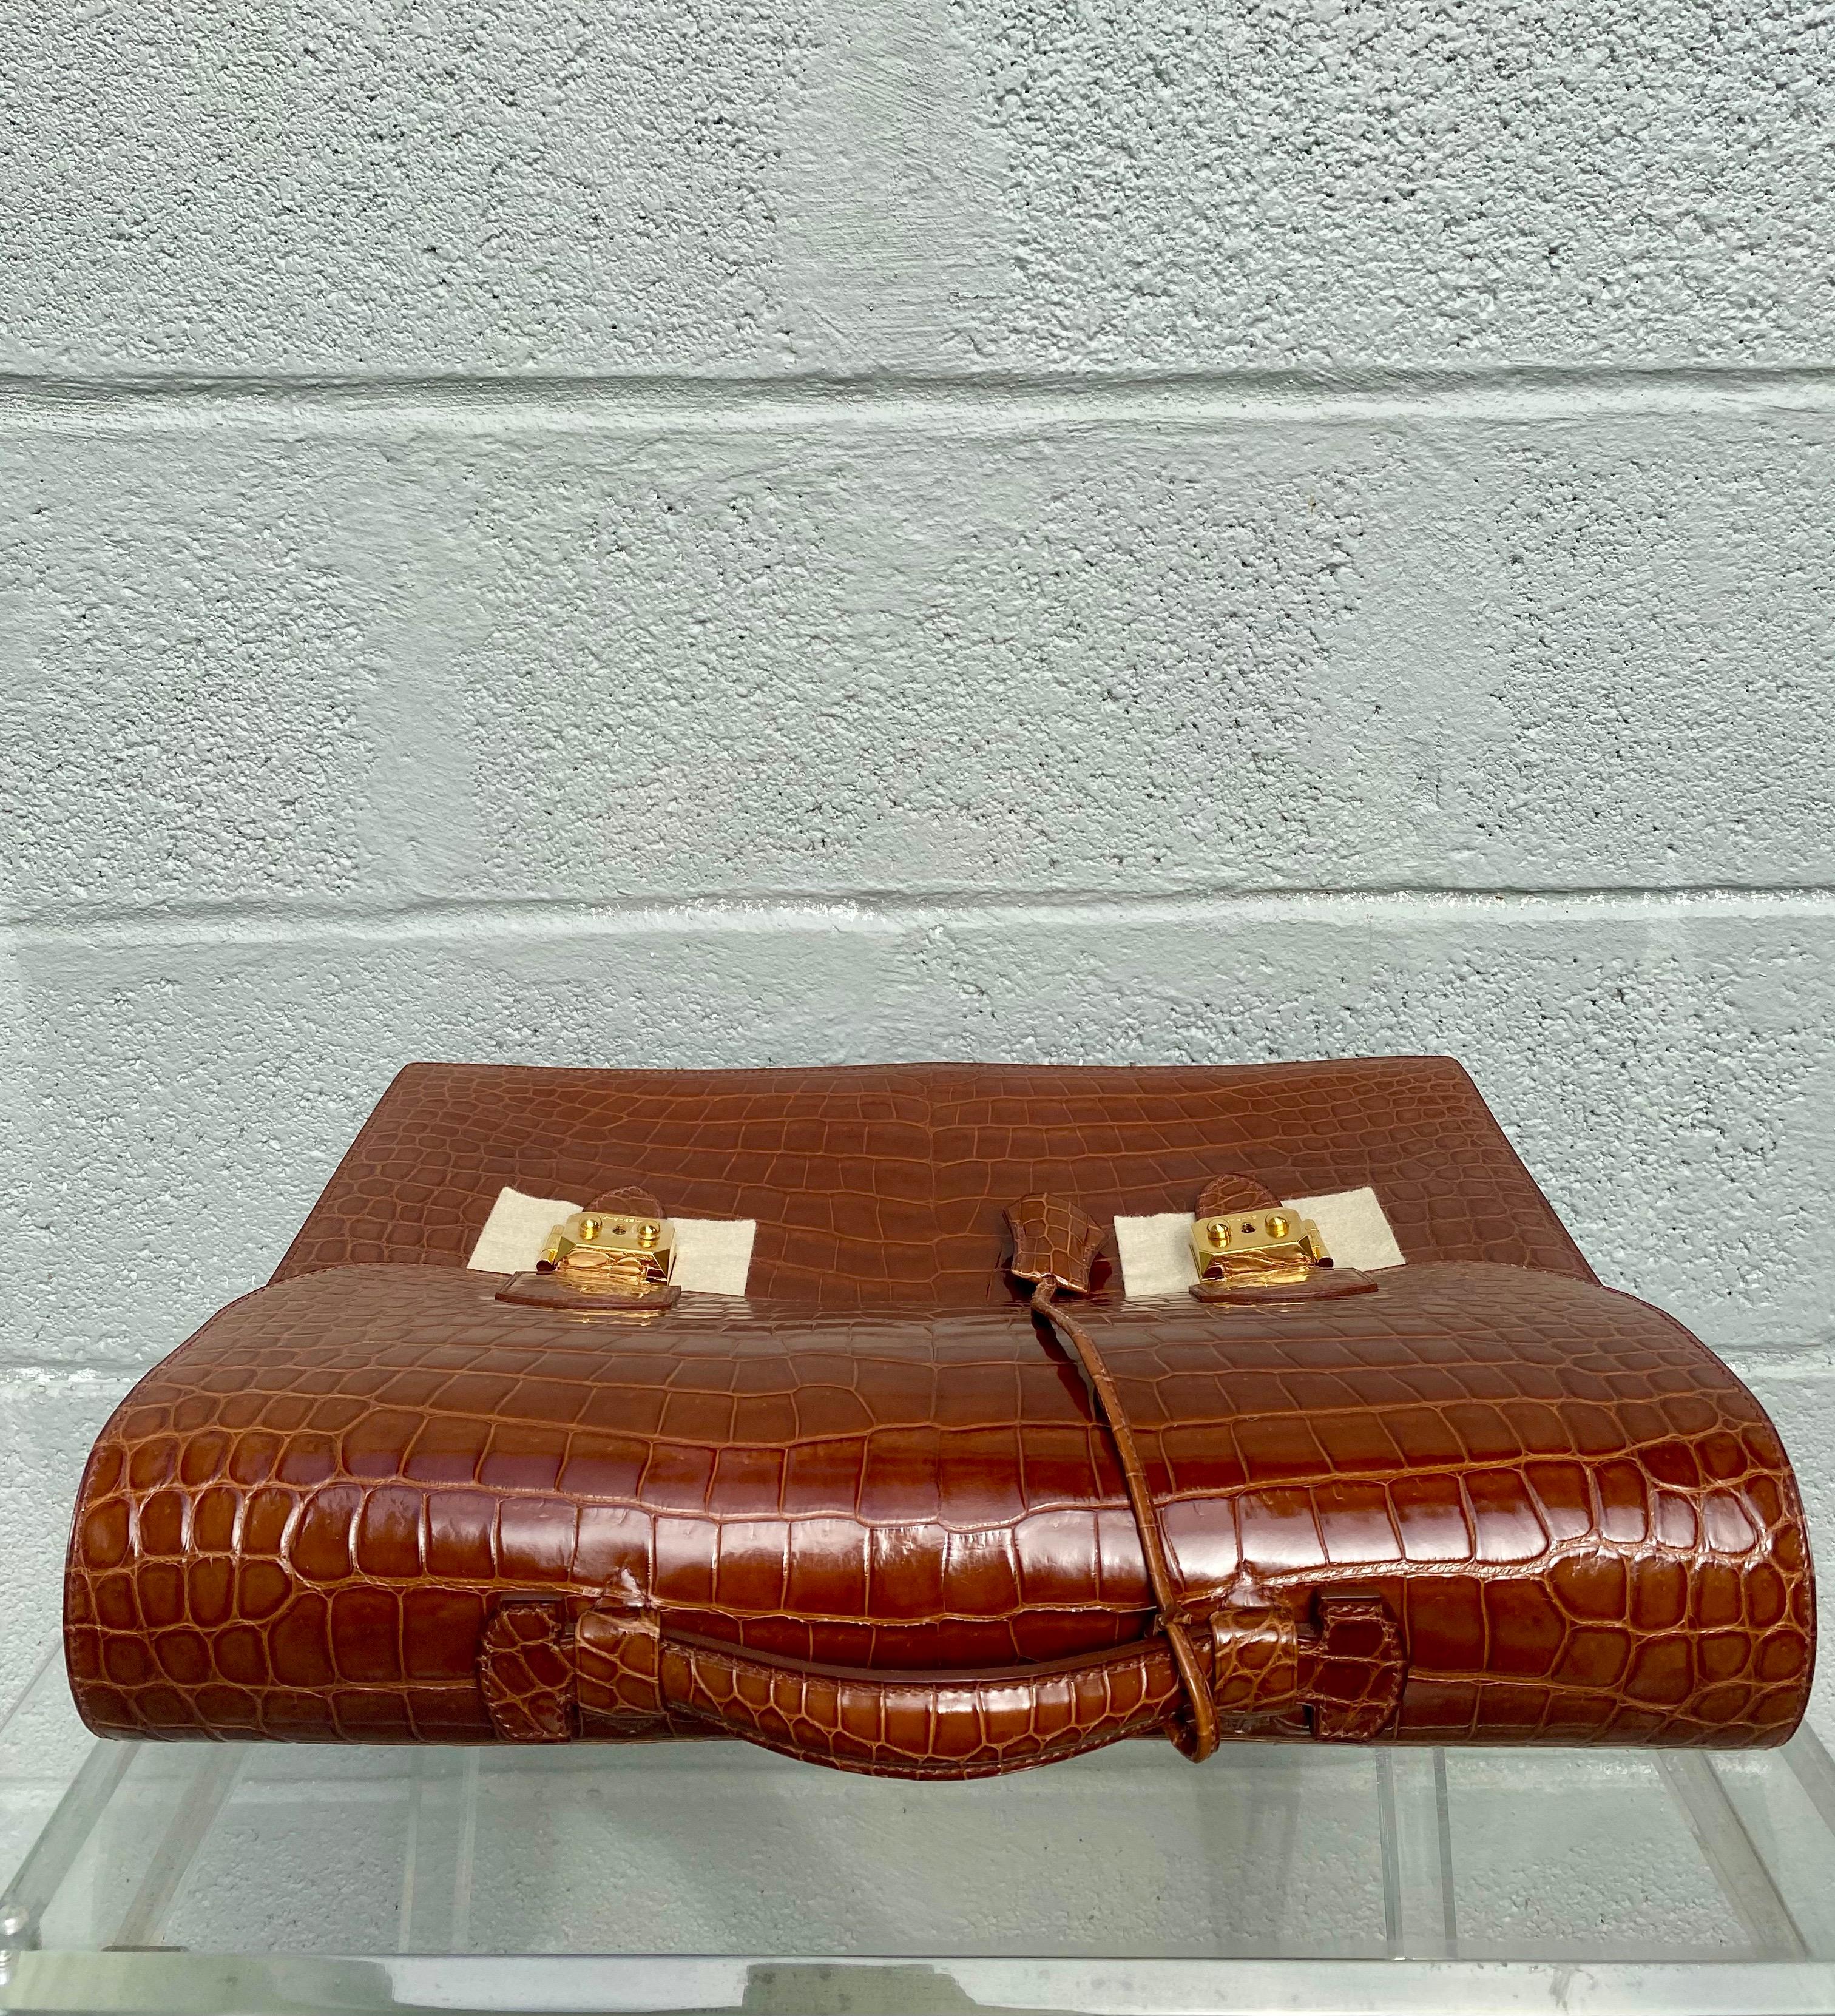 New Hermes Sac à Depeche Crocodile Briefcase 41cm In New Condition For Sale In Fort Lauderdale, FL